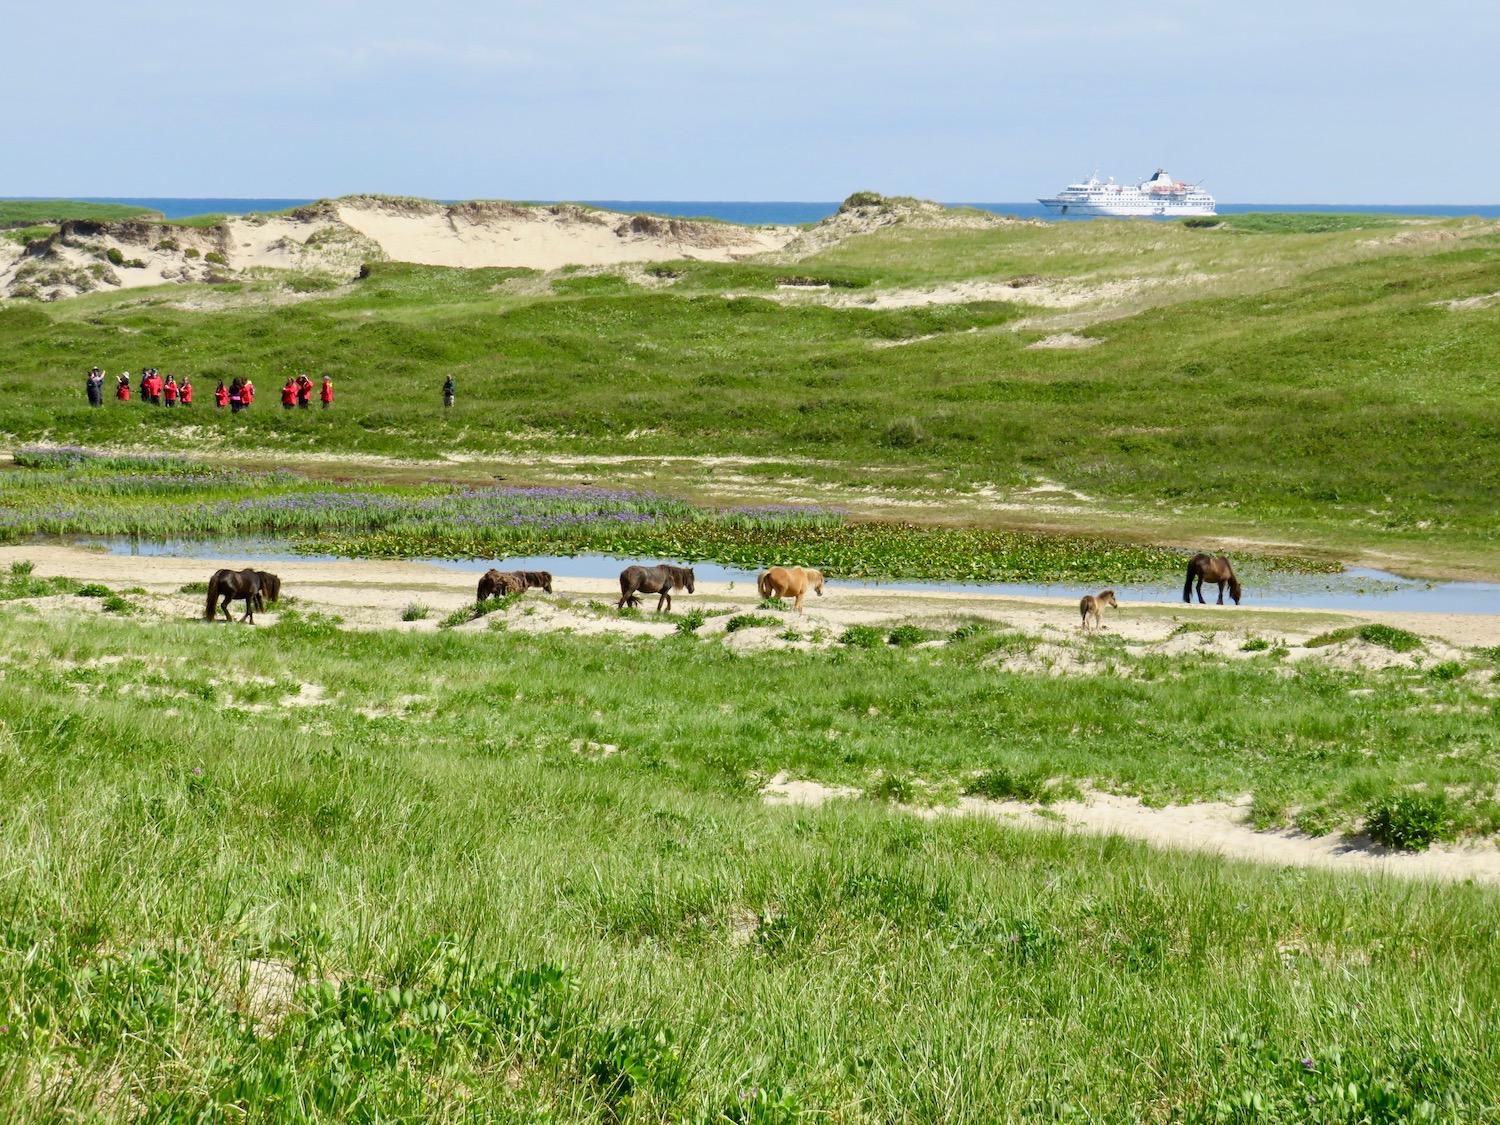 Horses head for a drink at one of the freshwater ponds at Sable Island National Park Reserve.